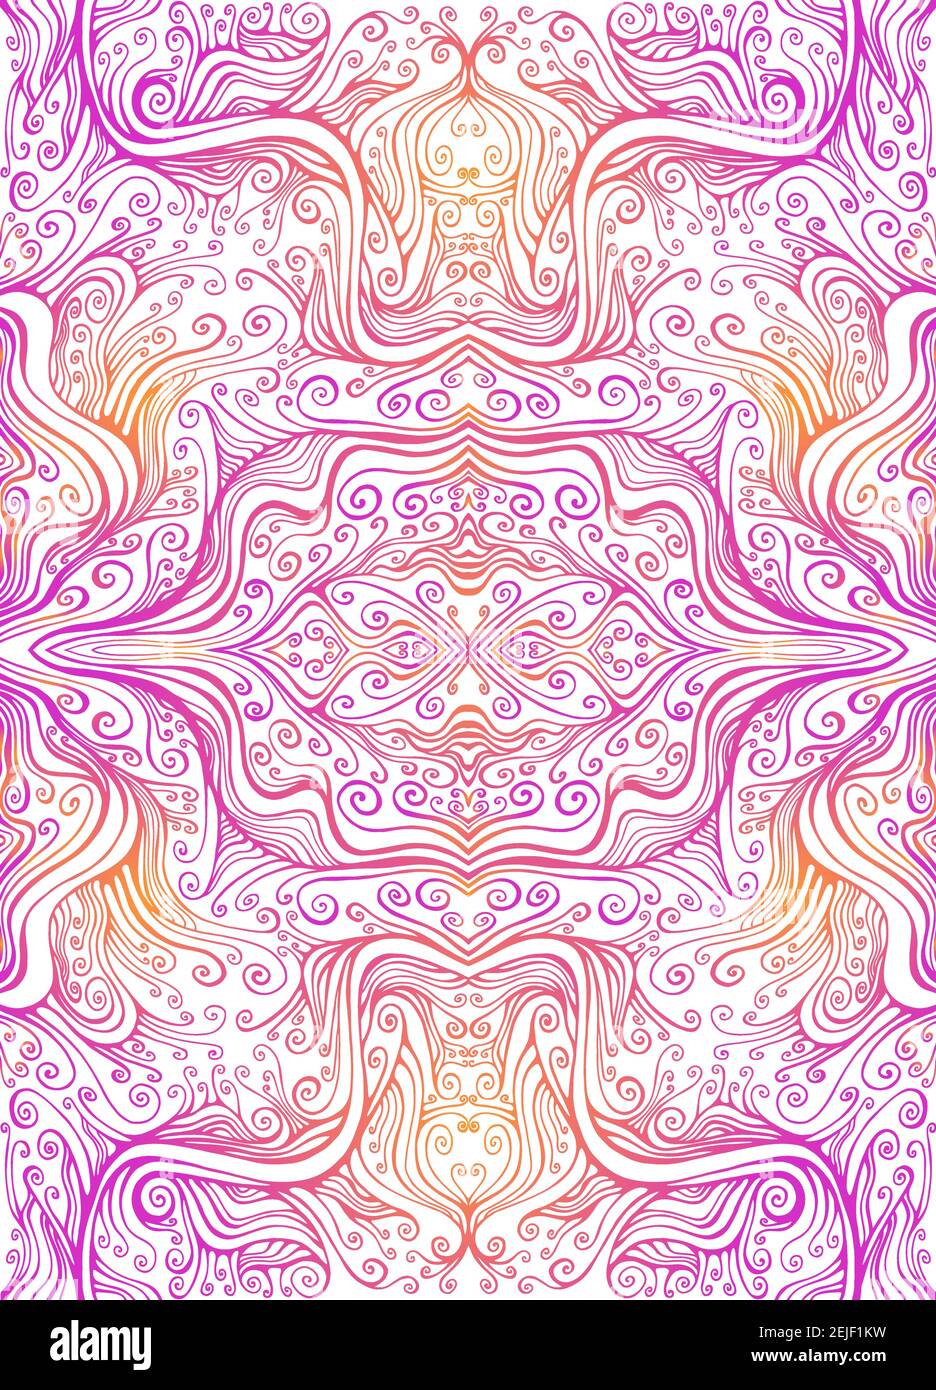 Abstract psychedelic fractal pattern, pink orange gradient color outline, isolated on white. Stock Vector